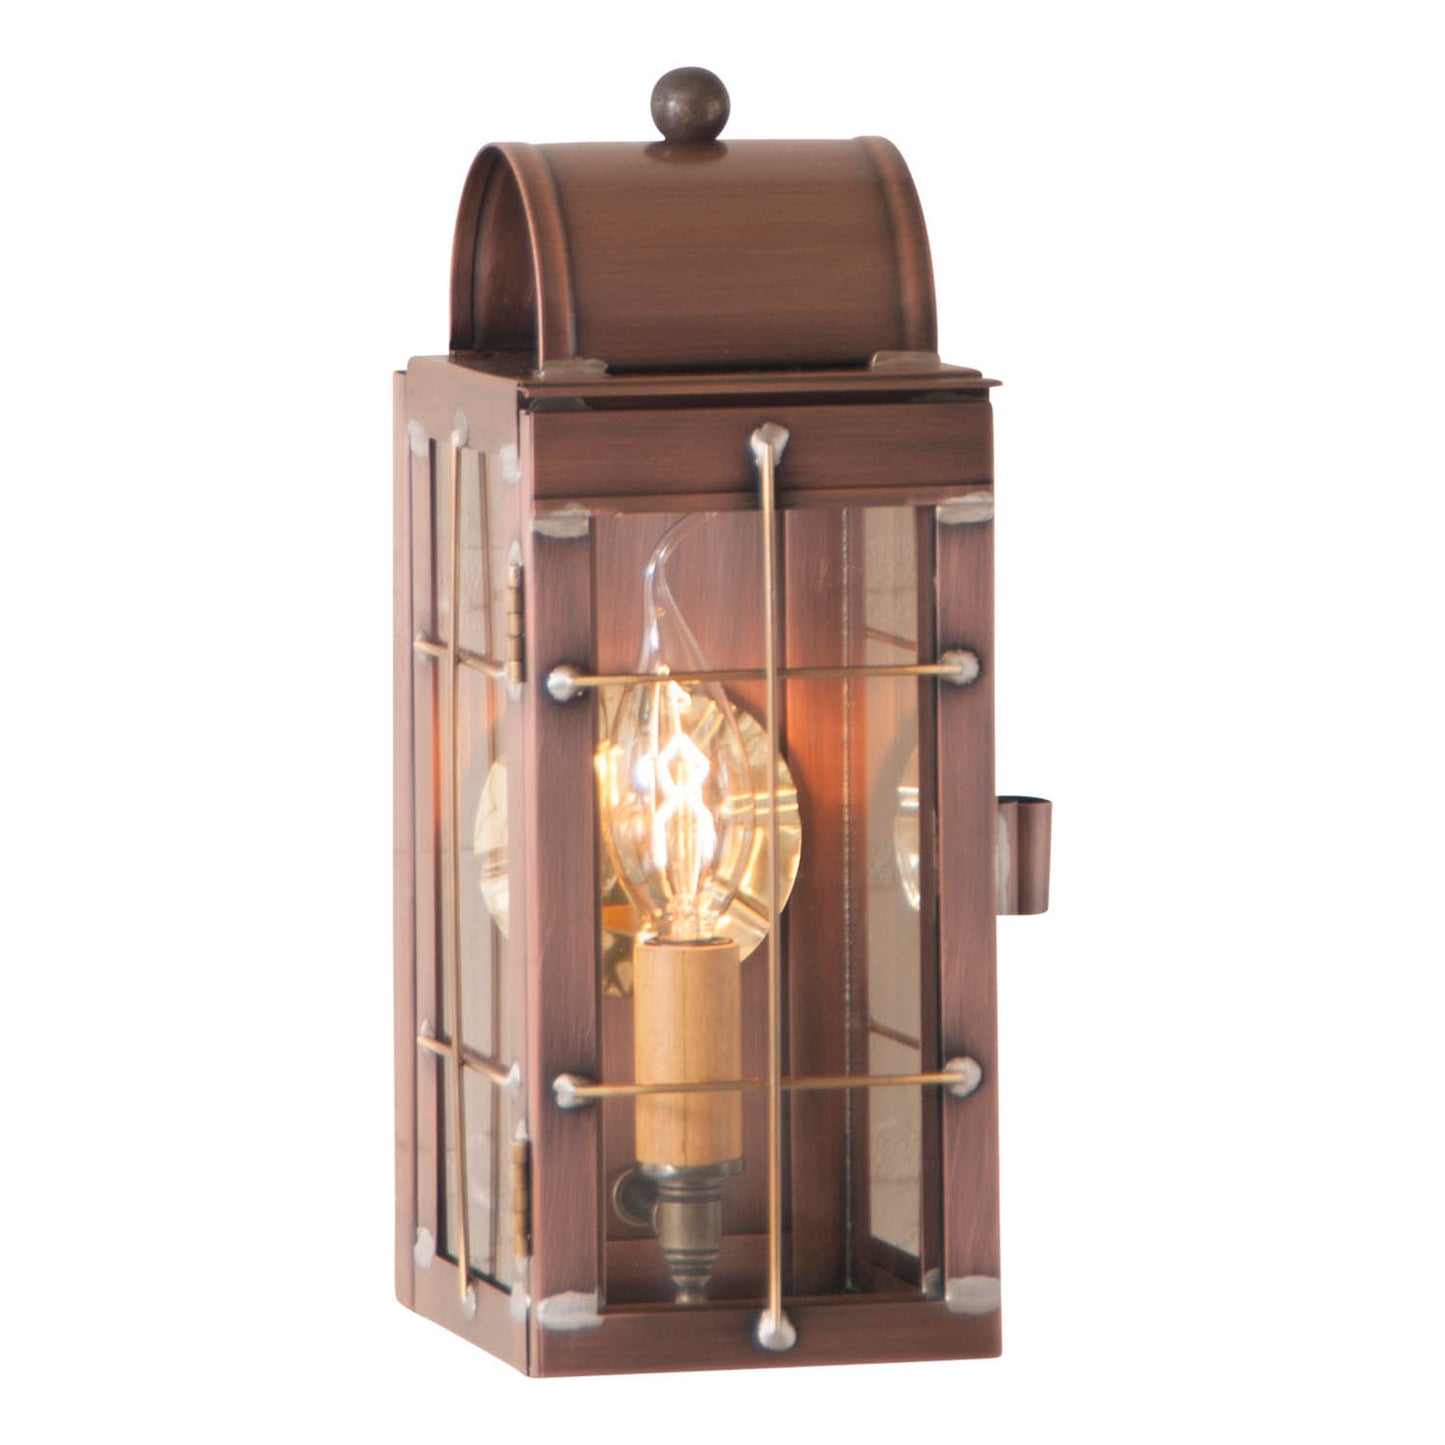 Hand-Crafted | Cape Cod | Wall Lantern